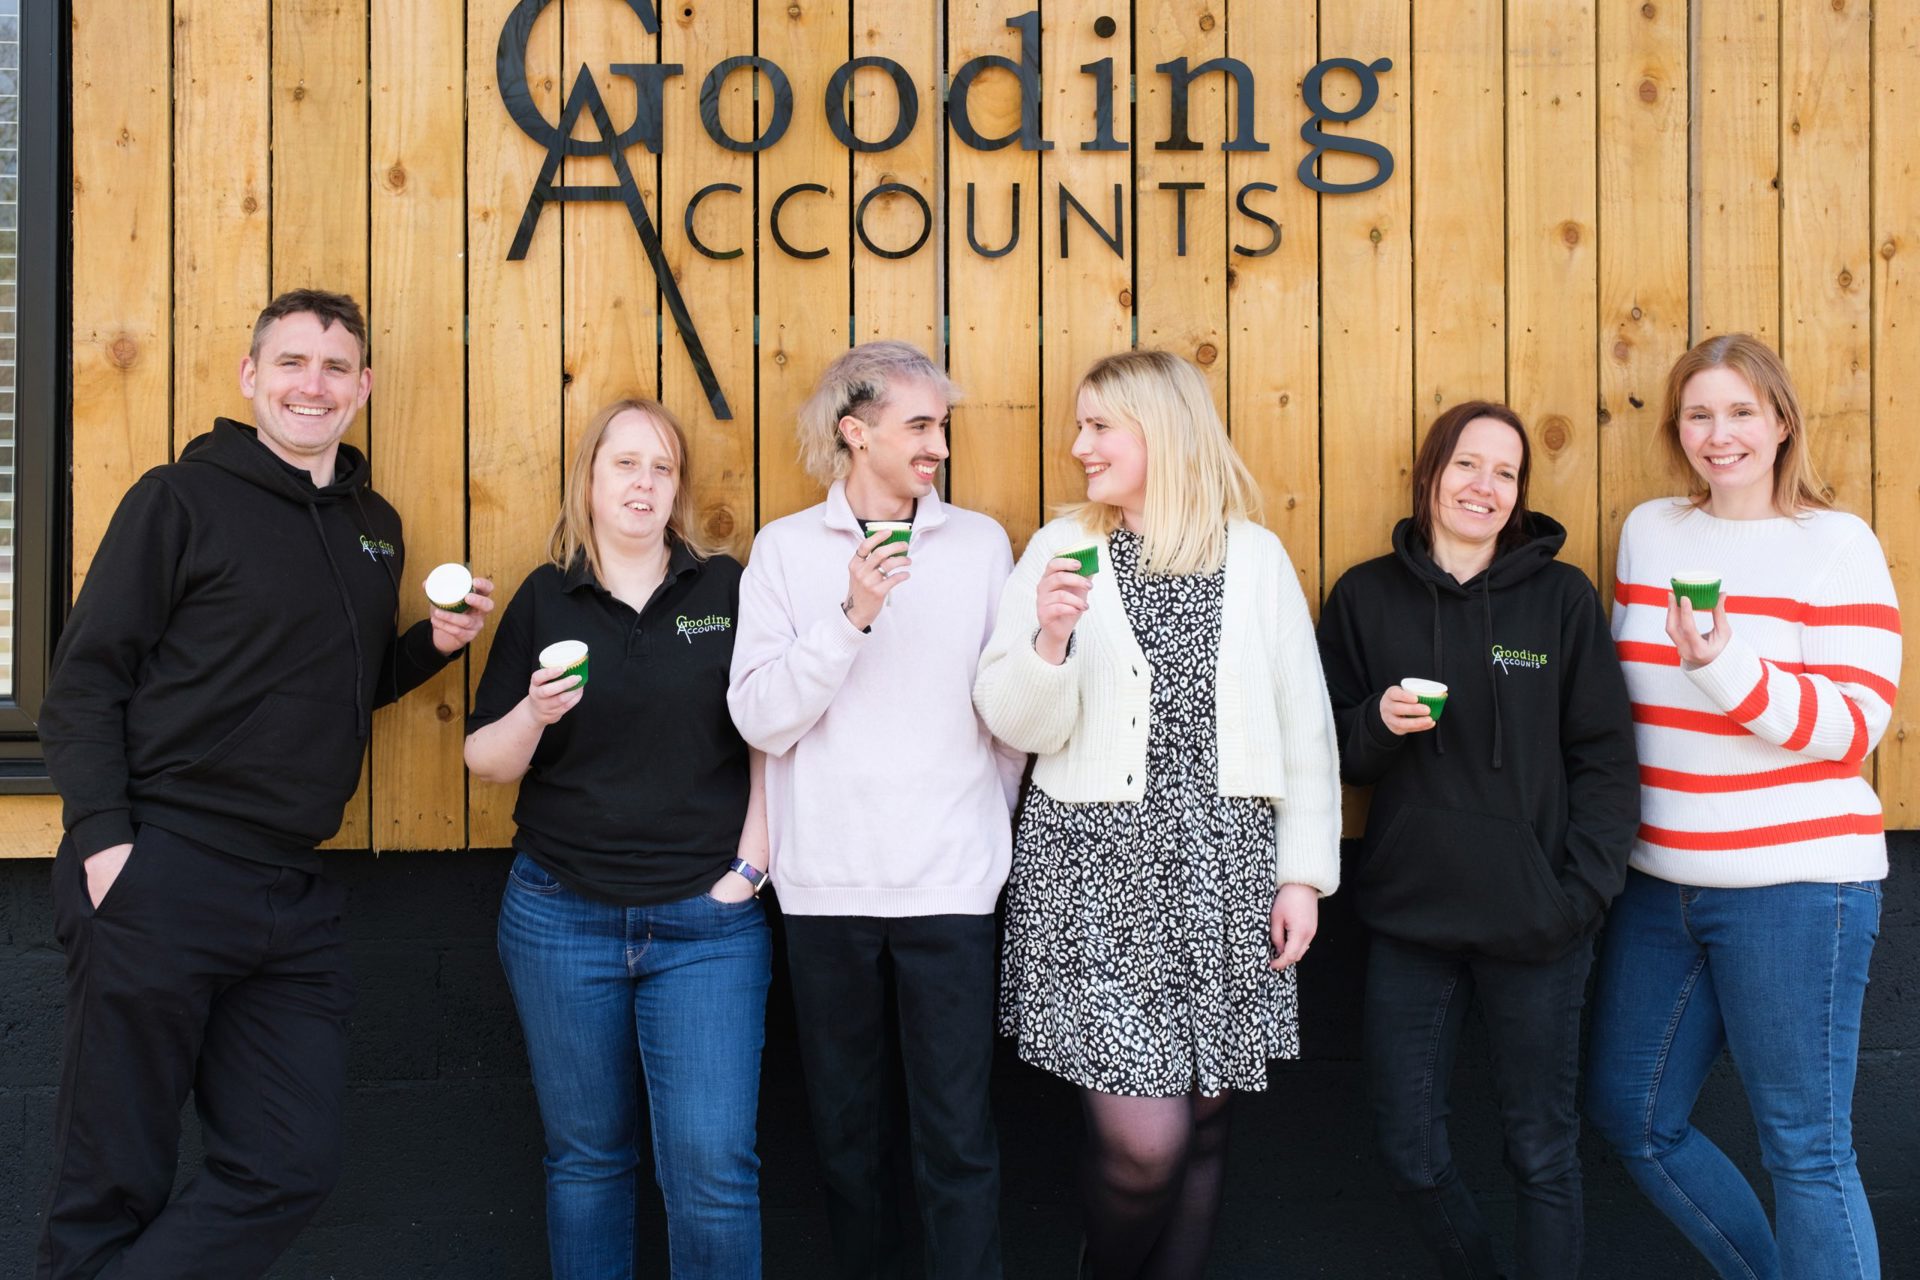 6 people standing in front of a Gooding Accounts sign